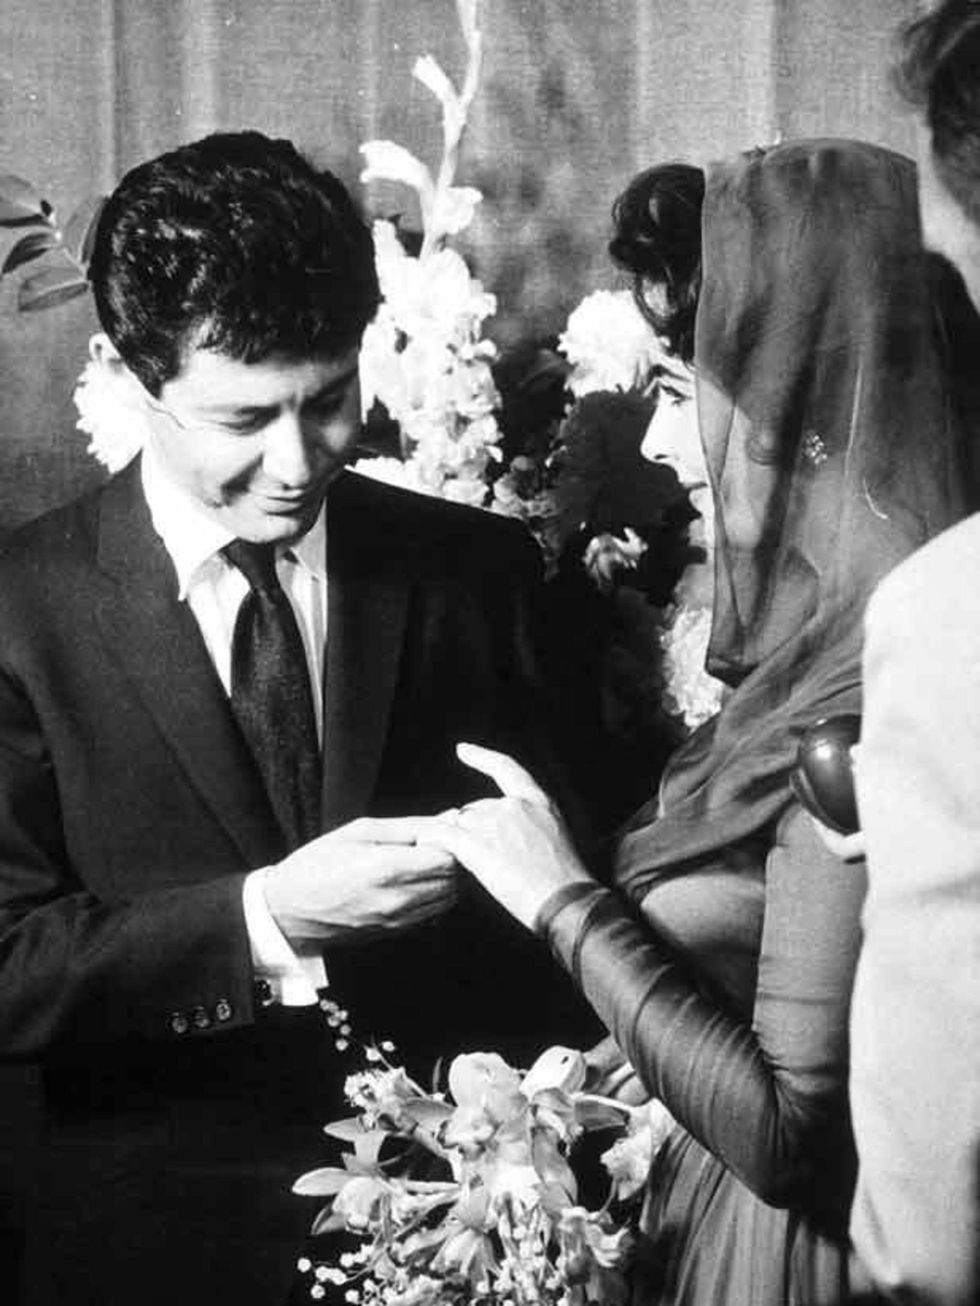 <p><a href="http://www.elleuk.com/starstyle/special-features/%28section%29/elizabeth-taylor-a-retrospective">Elizabeth Taylor</a> &amp; Eddie Fisher kiss after their wedding in Las Vegas, 1959</p>